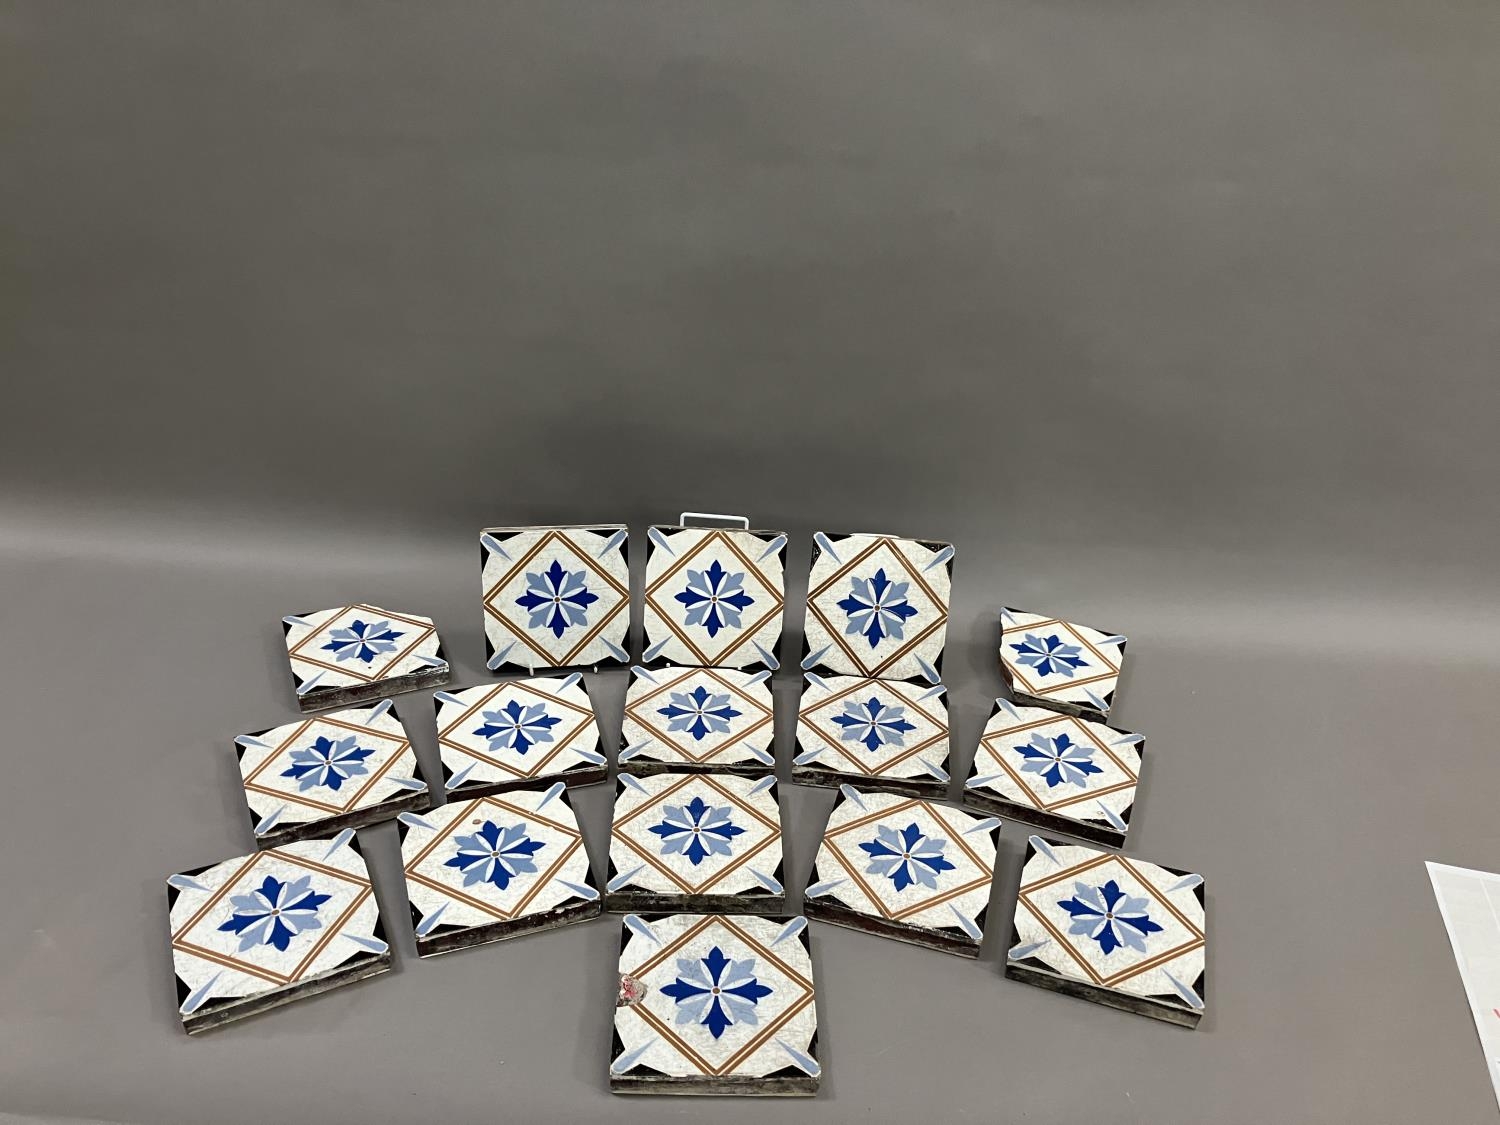 A set of thirteen 19th century Minton tiles glazed in white with a two-shade blue stylised flower to - Image 2 of 3